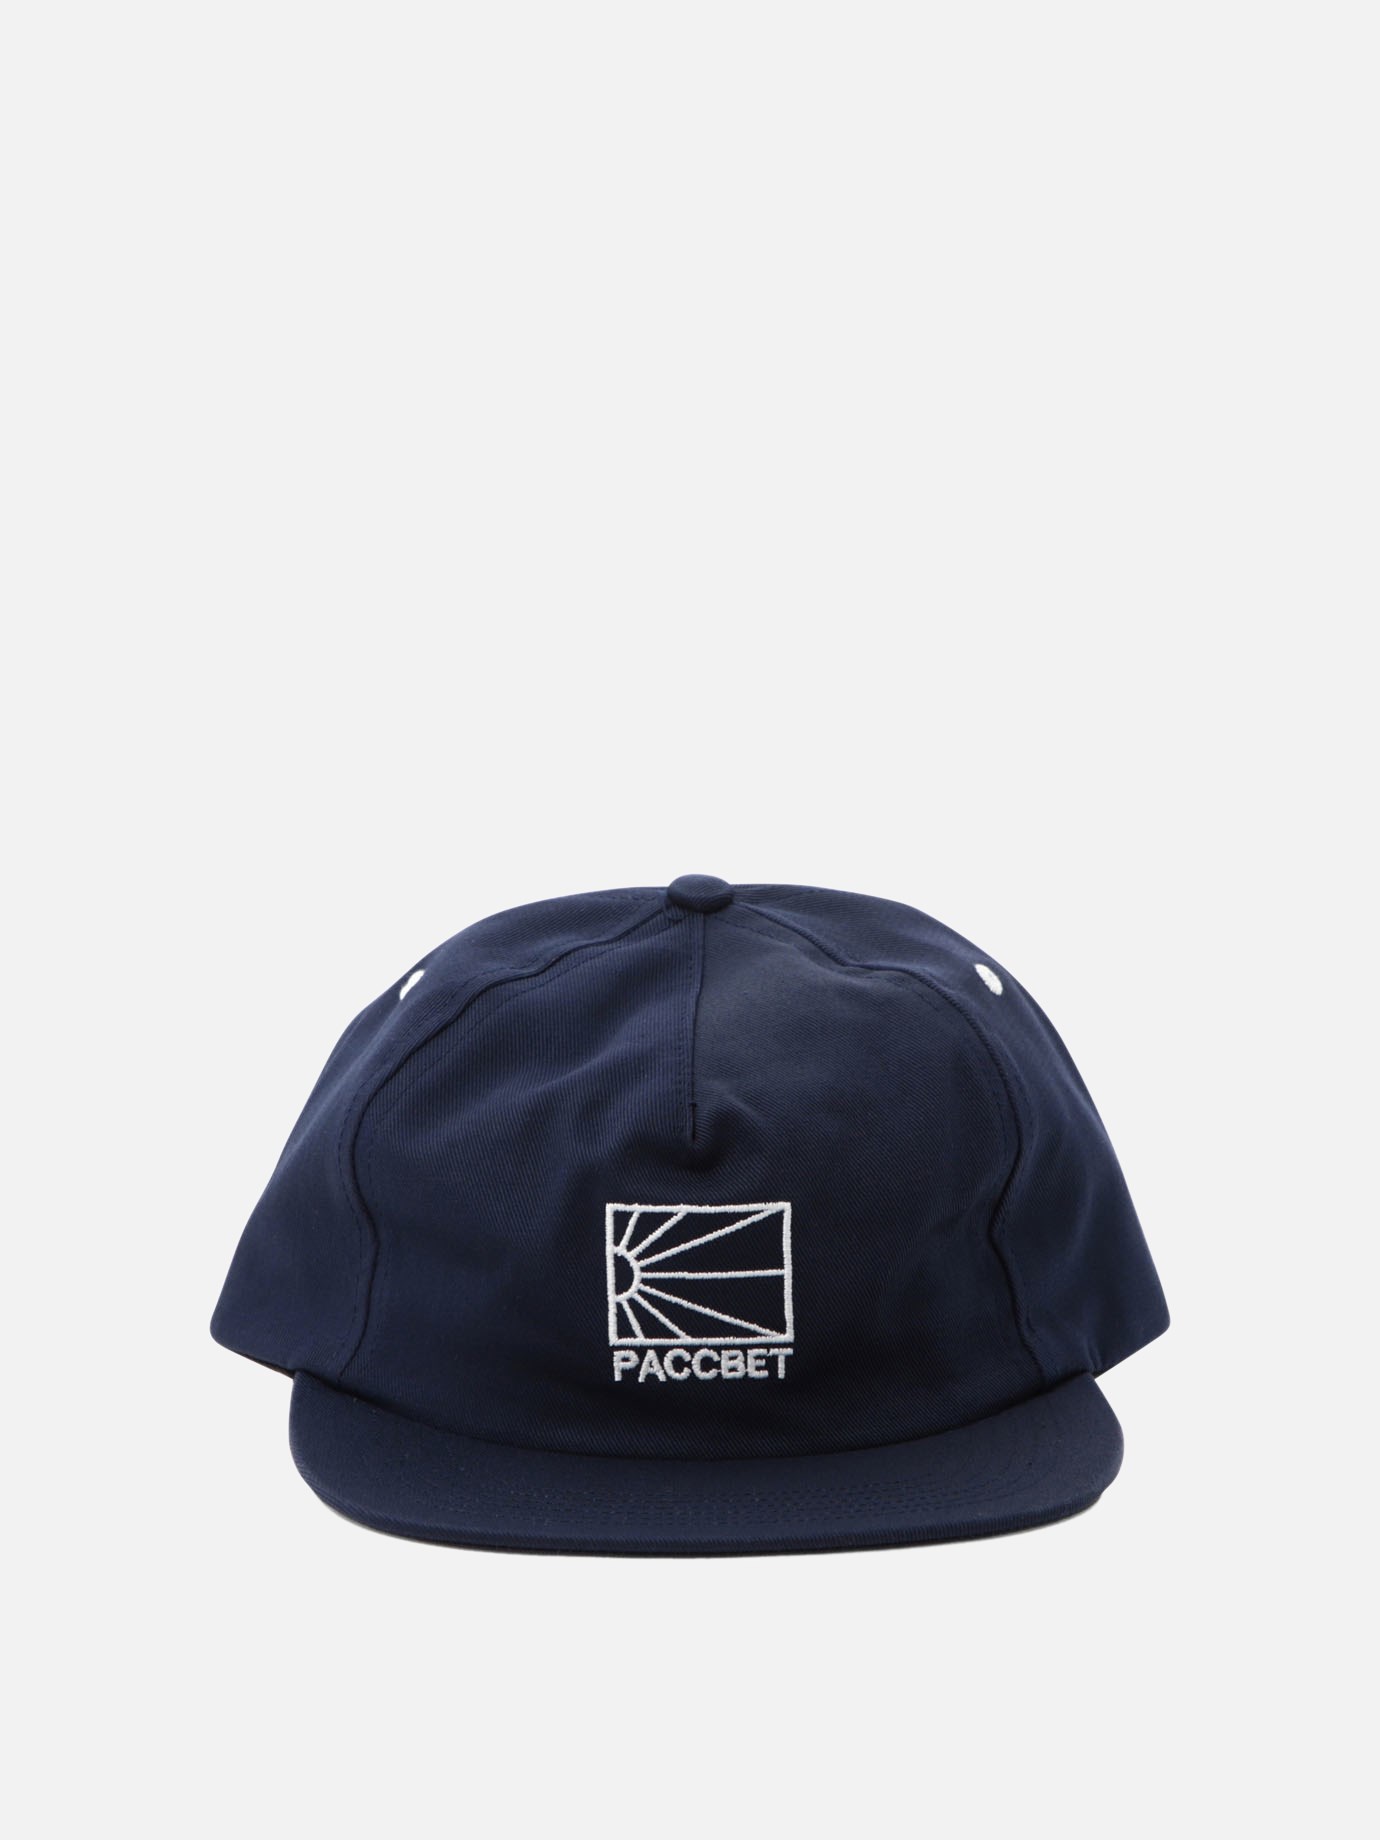 Cappello trucker  Paccbet by Paccbet - 1